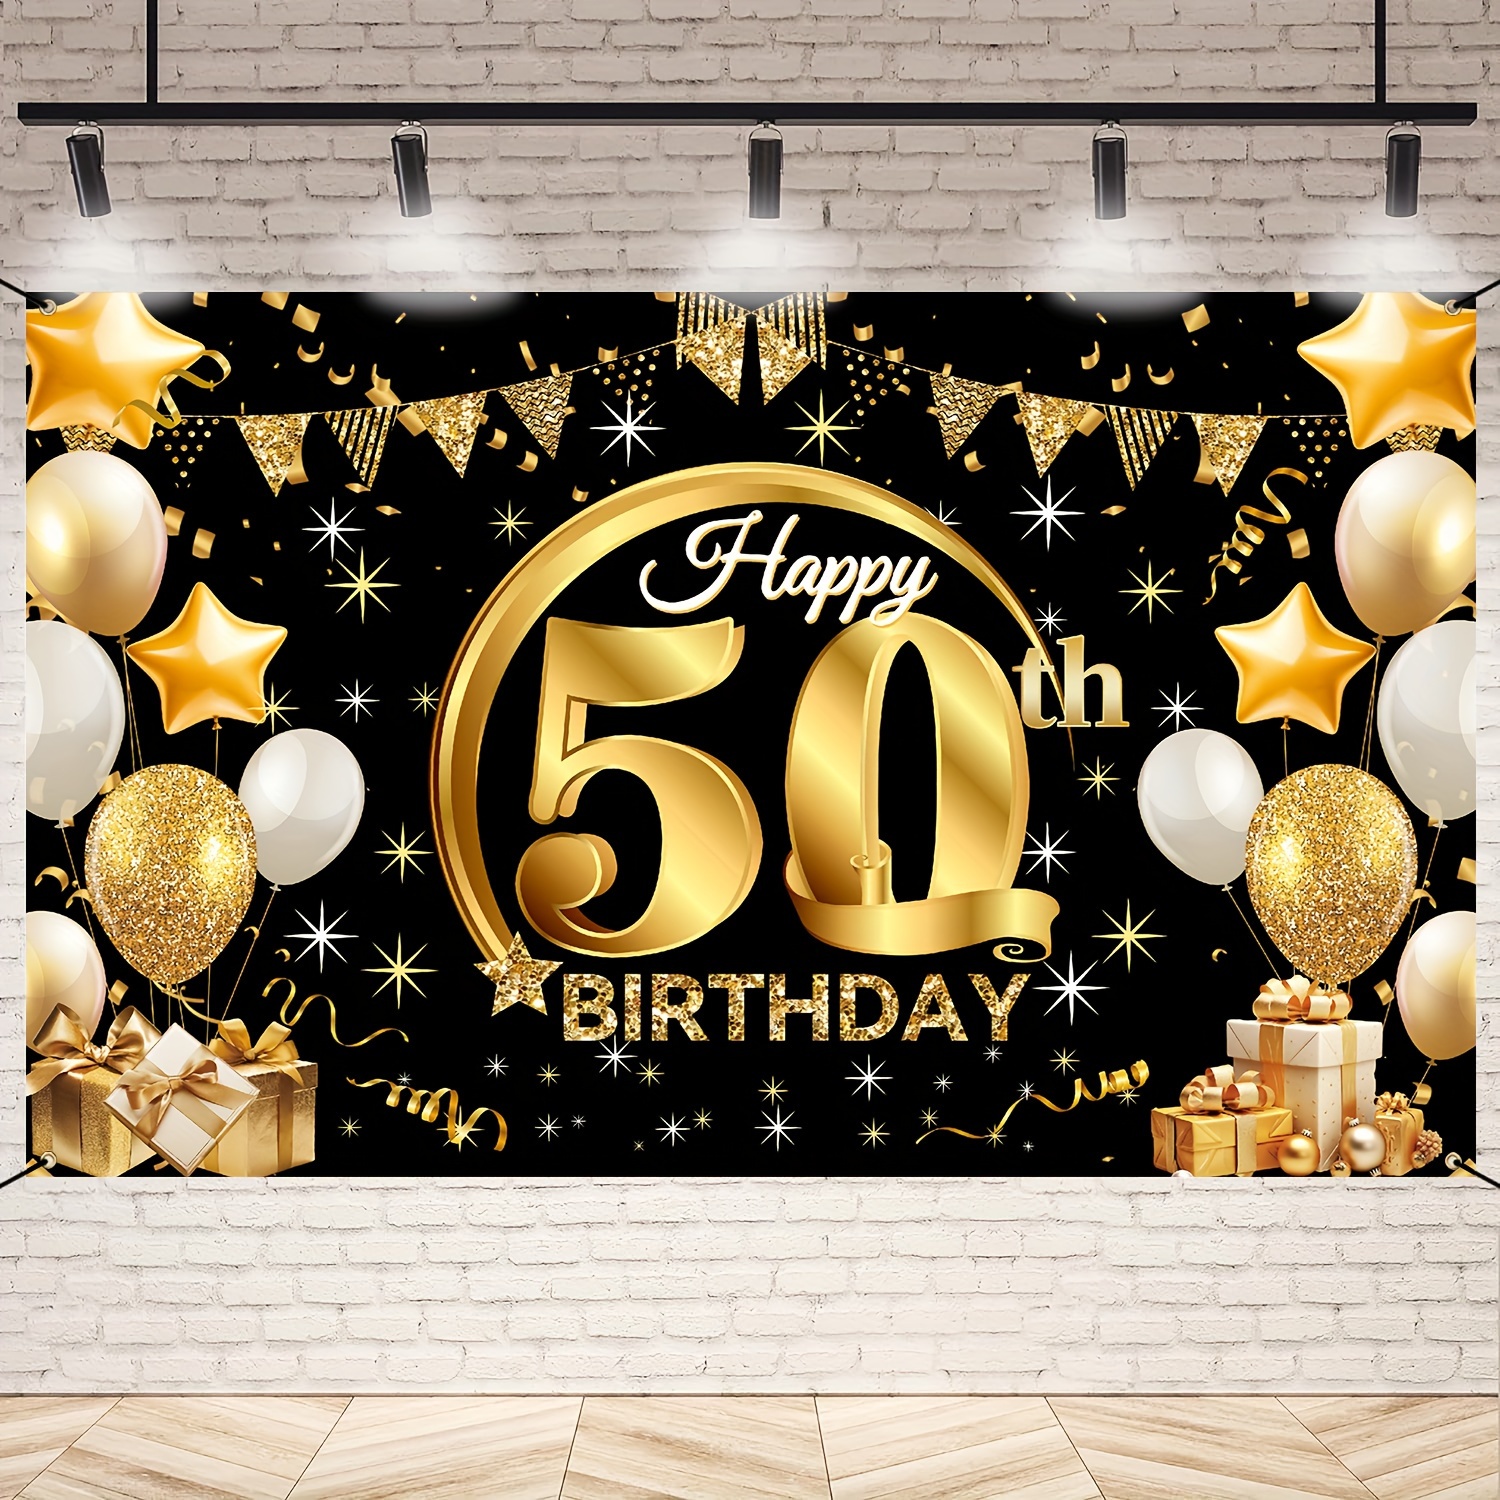 

Happy 50th Birthday Banner - Black & Gold Fabric Party Backdrop For Men & Women, Photo Booth Prop, Yard Sign Decor